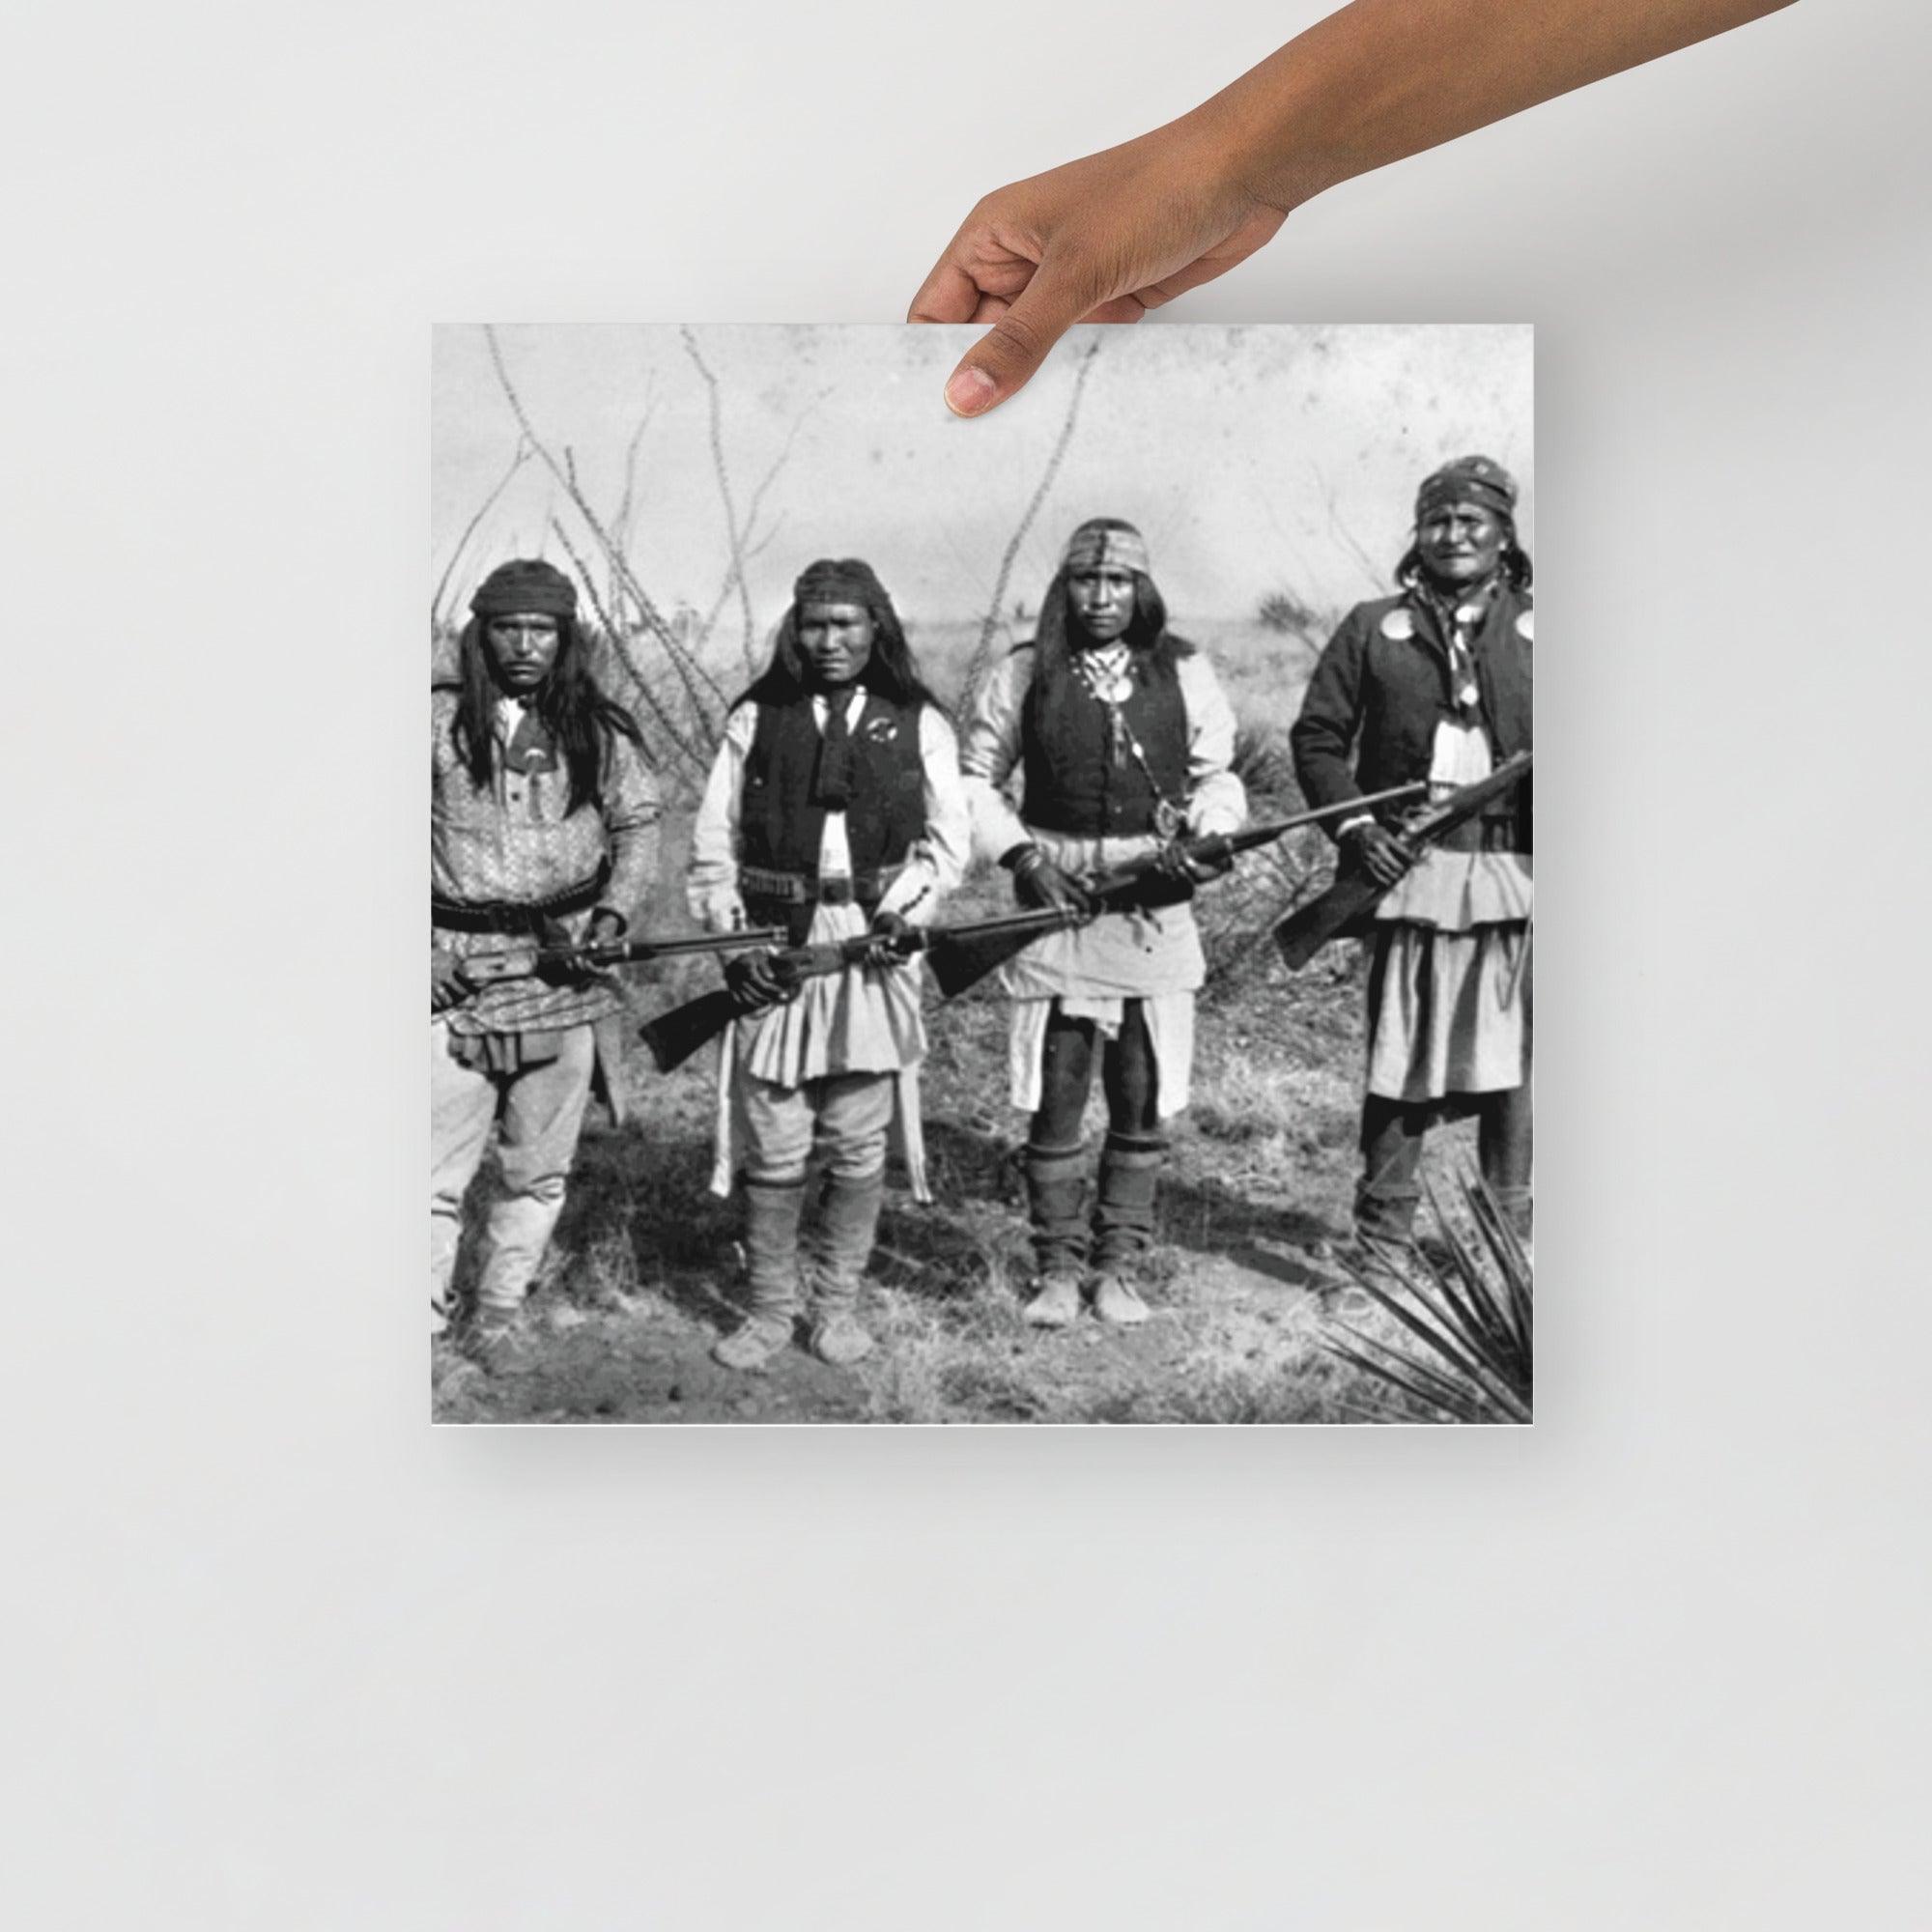 A Geronimo and His Warriors poster on a plain backdrop in size 16x16”.